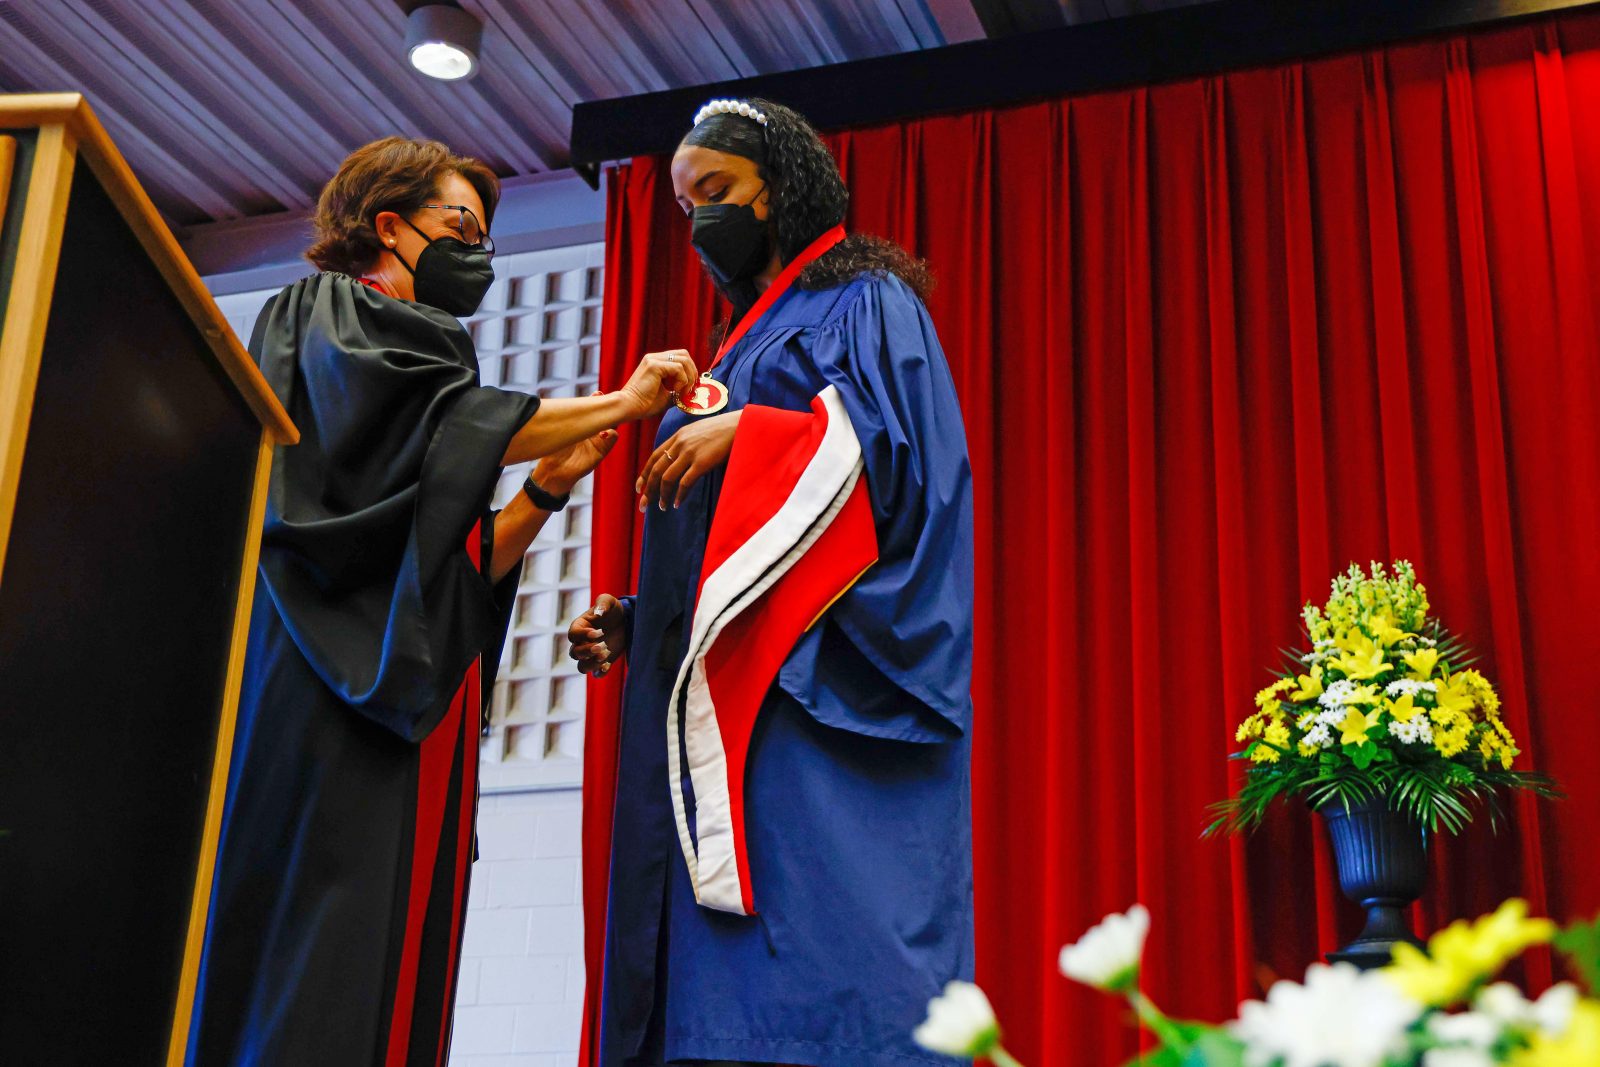 A woman puts a medal around another woman's neck. Both stand in front of a red curtain.